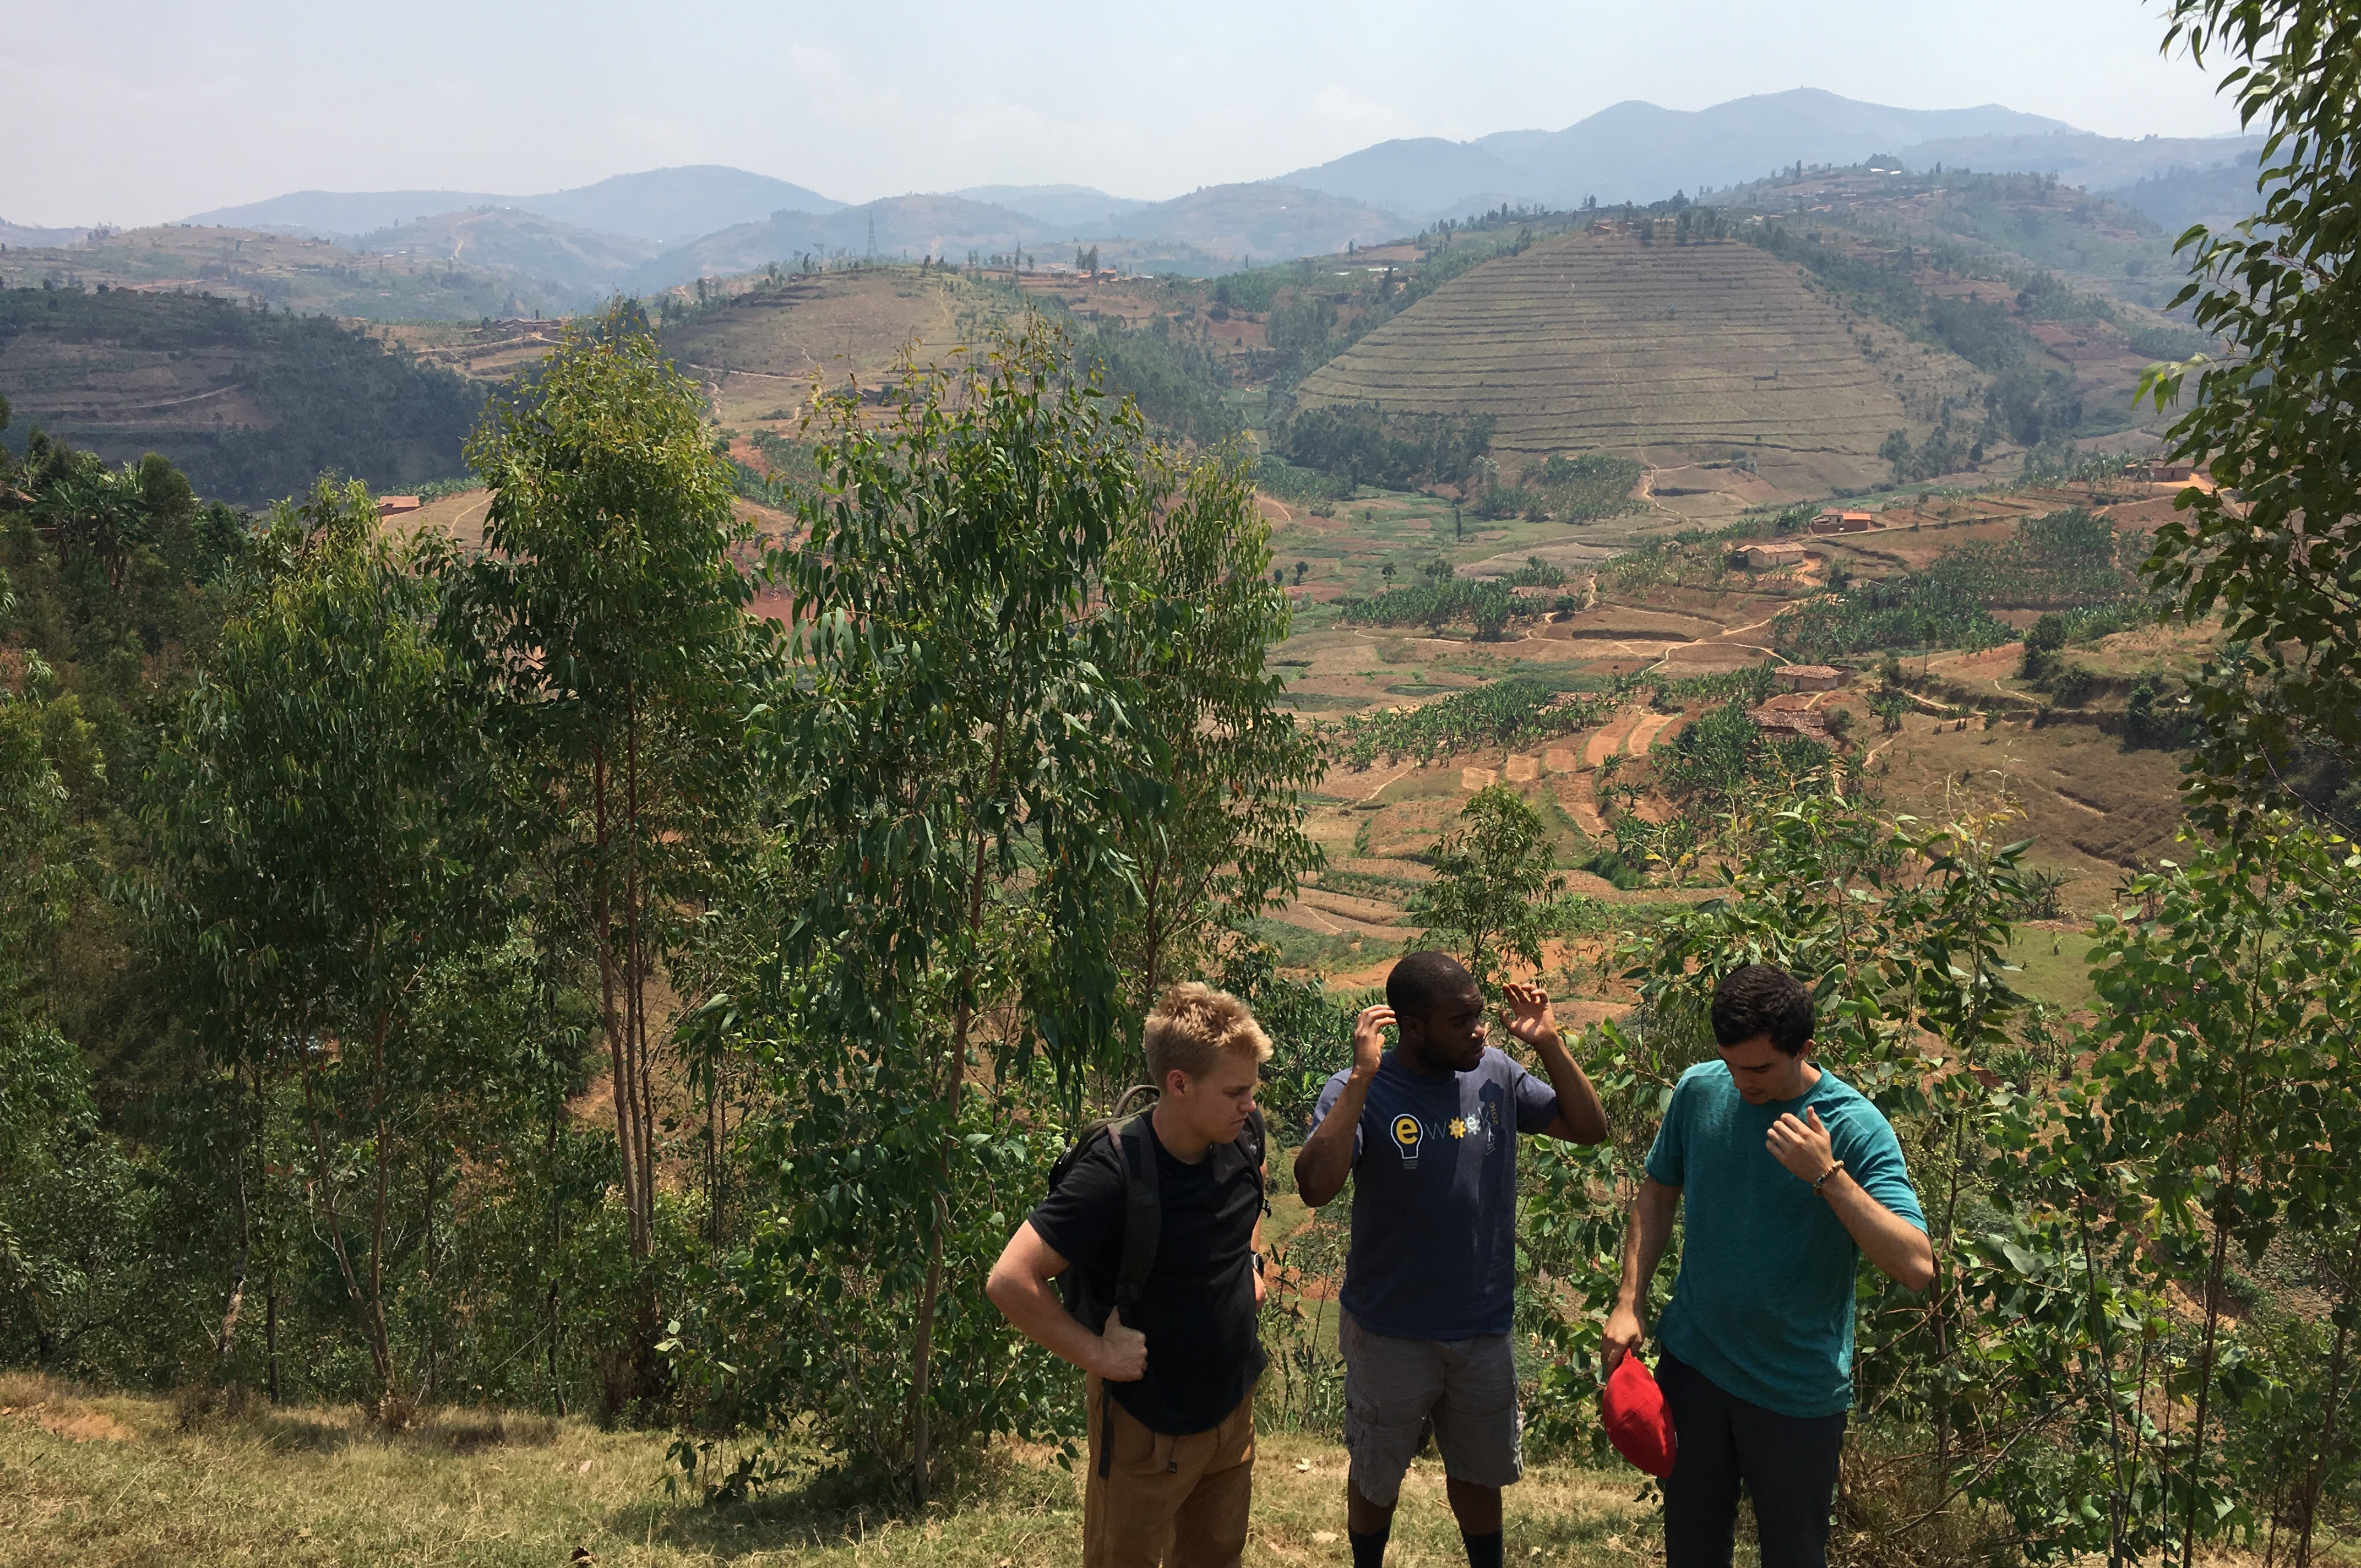 Ben, Uche, and Jon study the terrain for the future clay transport system